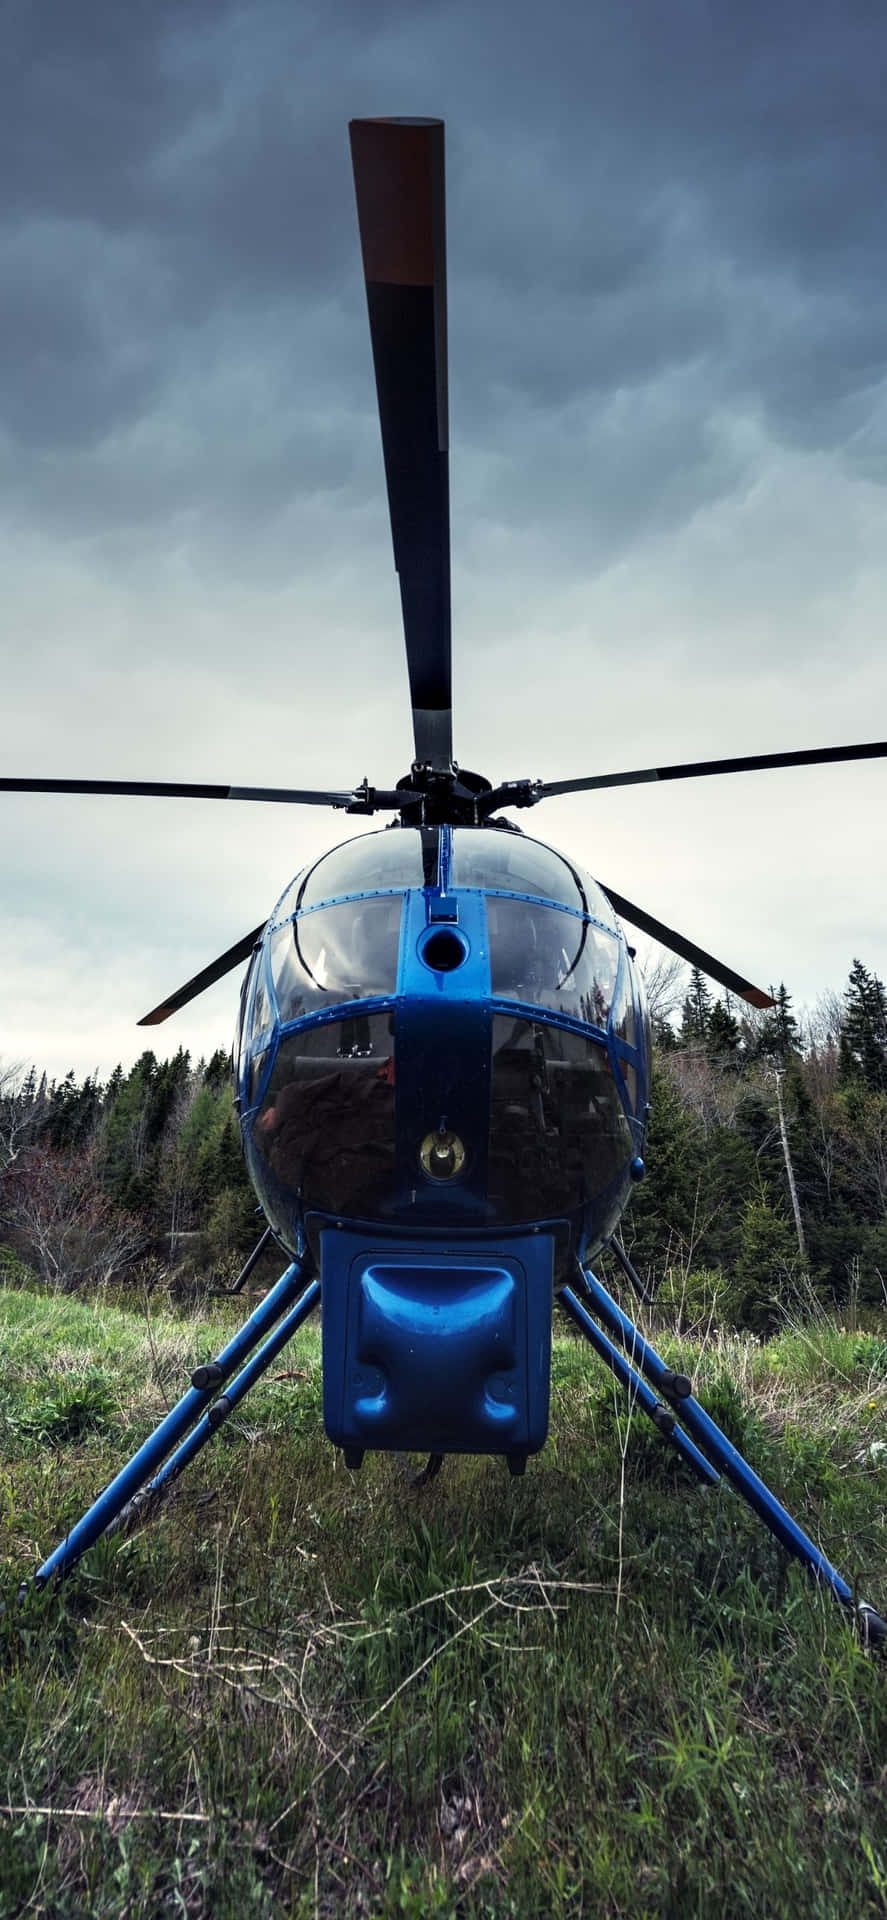 Explore The Skies Aboard A State-of-the-Art Helicopter